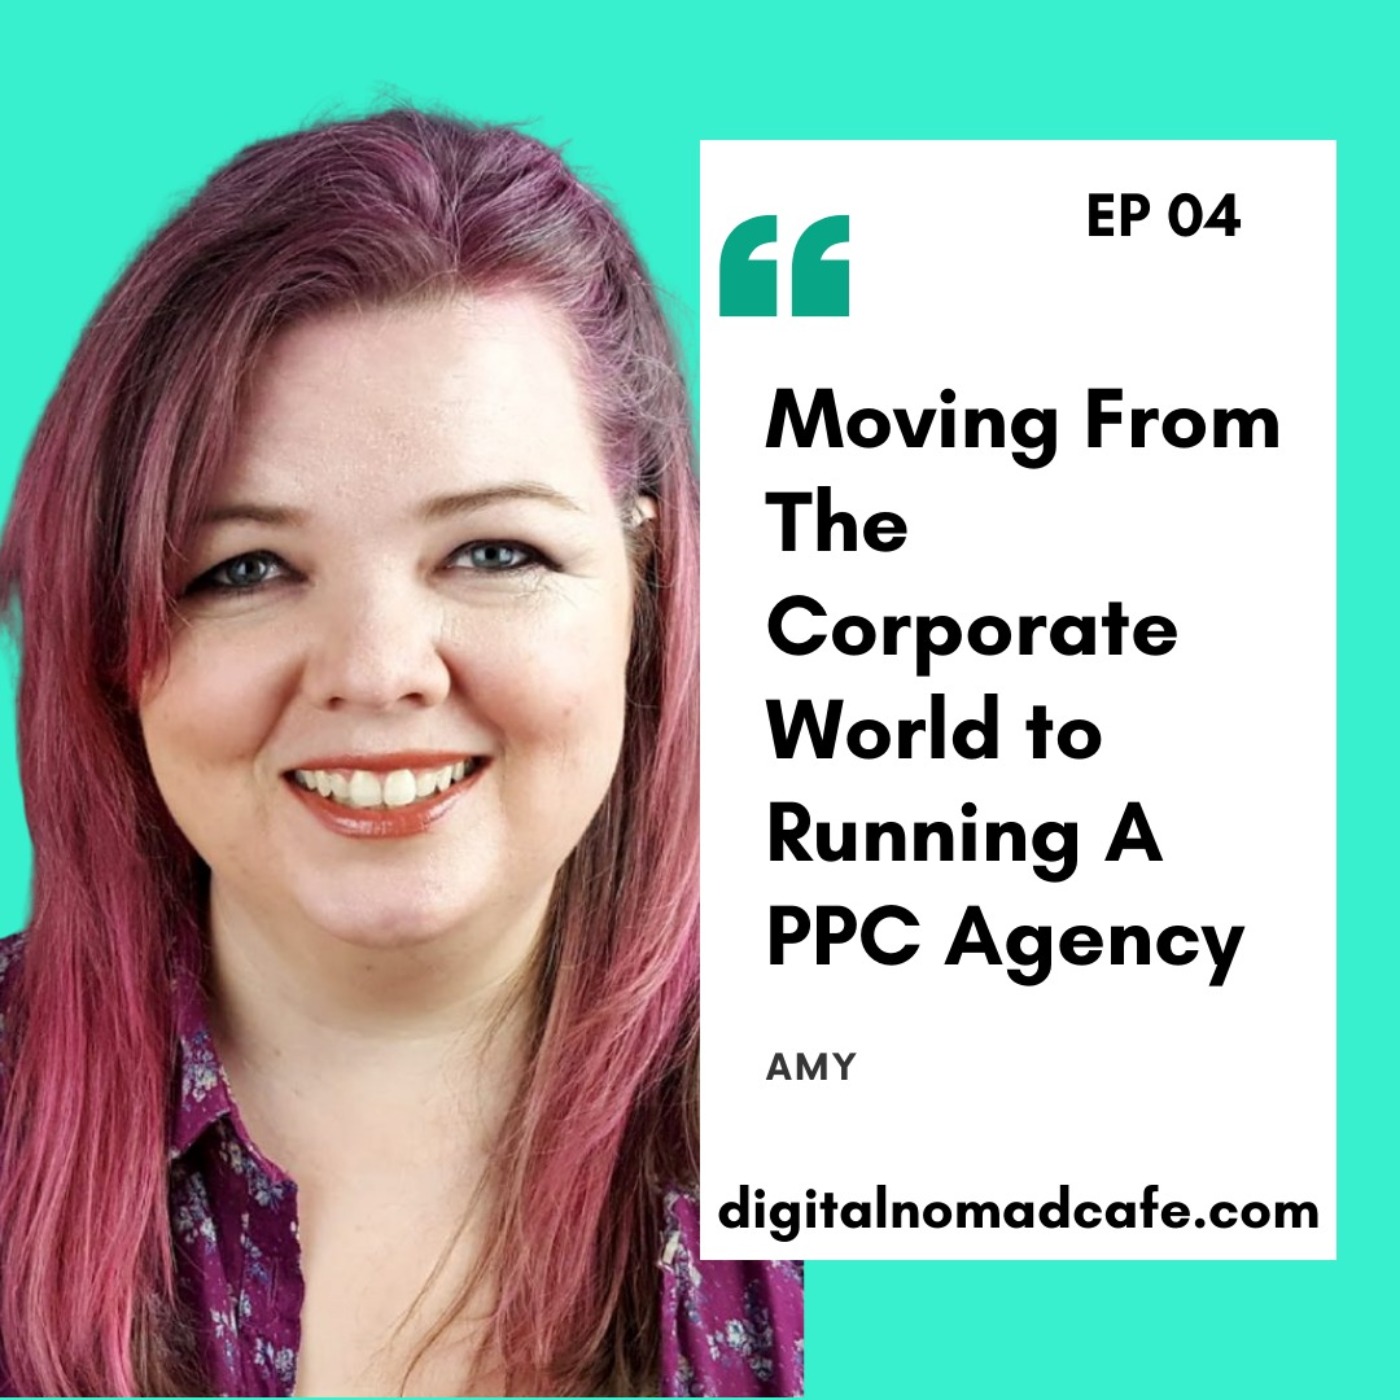 EP04: Moving From The Corporate World to Running A PPC Agency with Amy from PaidSearchMagic.com